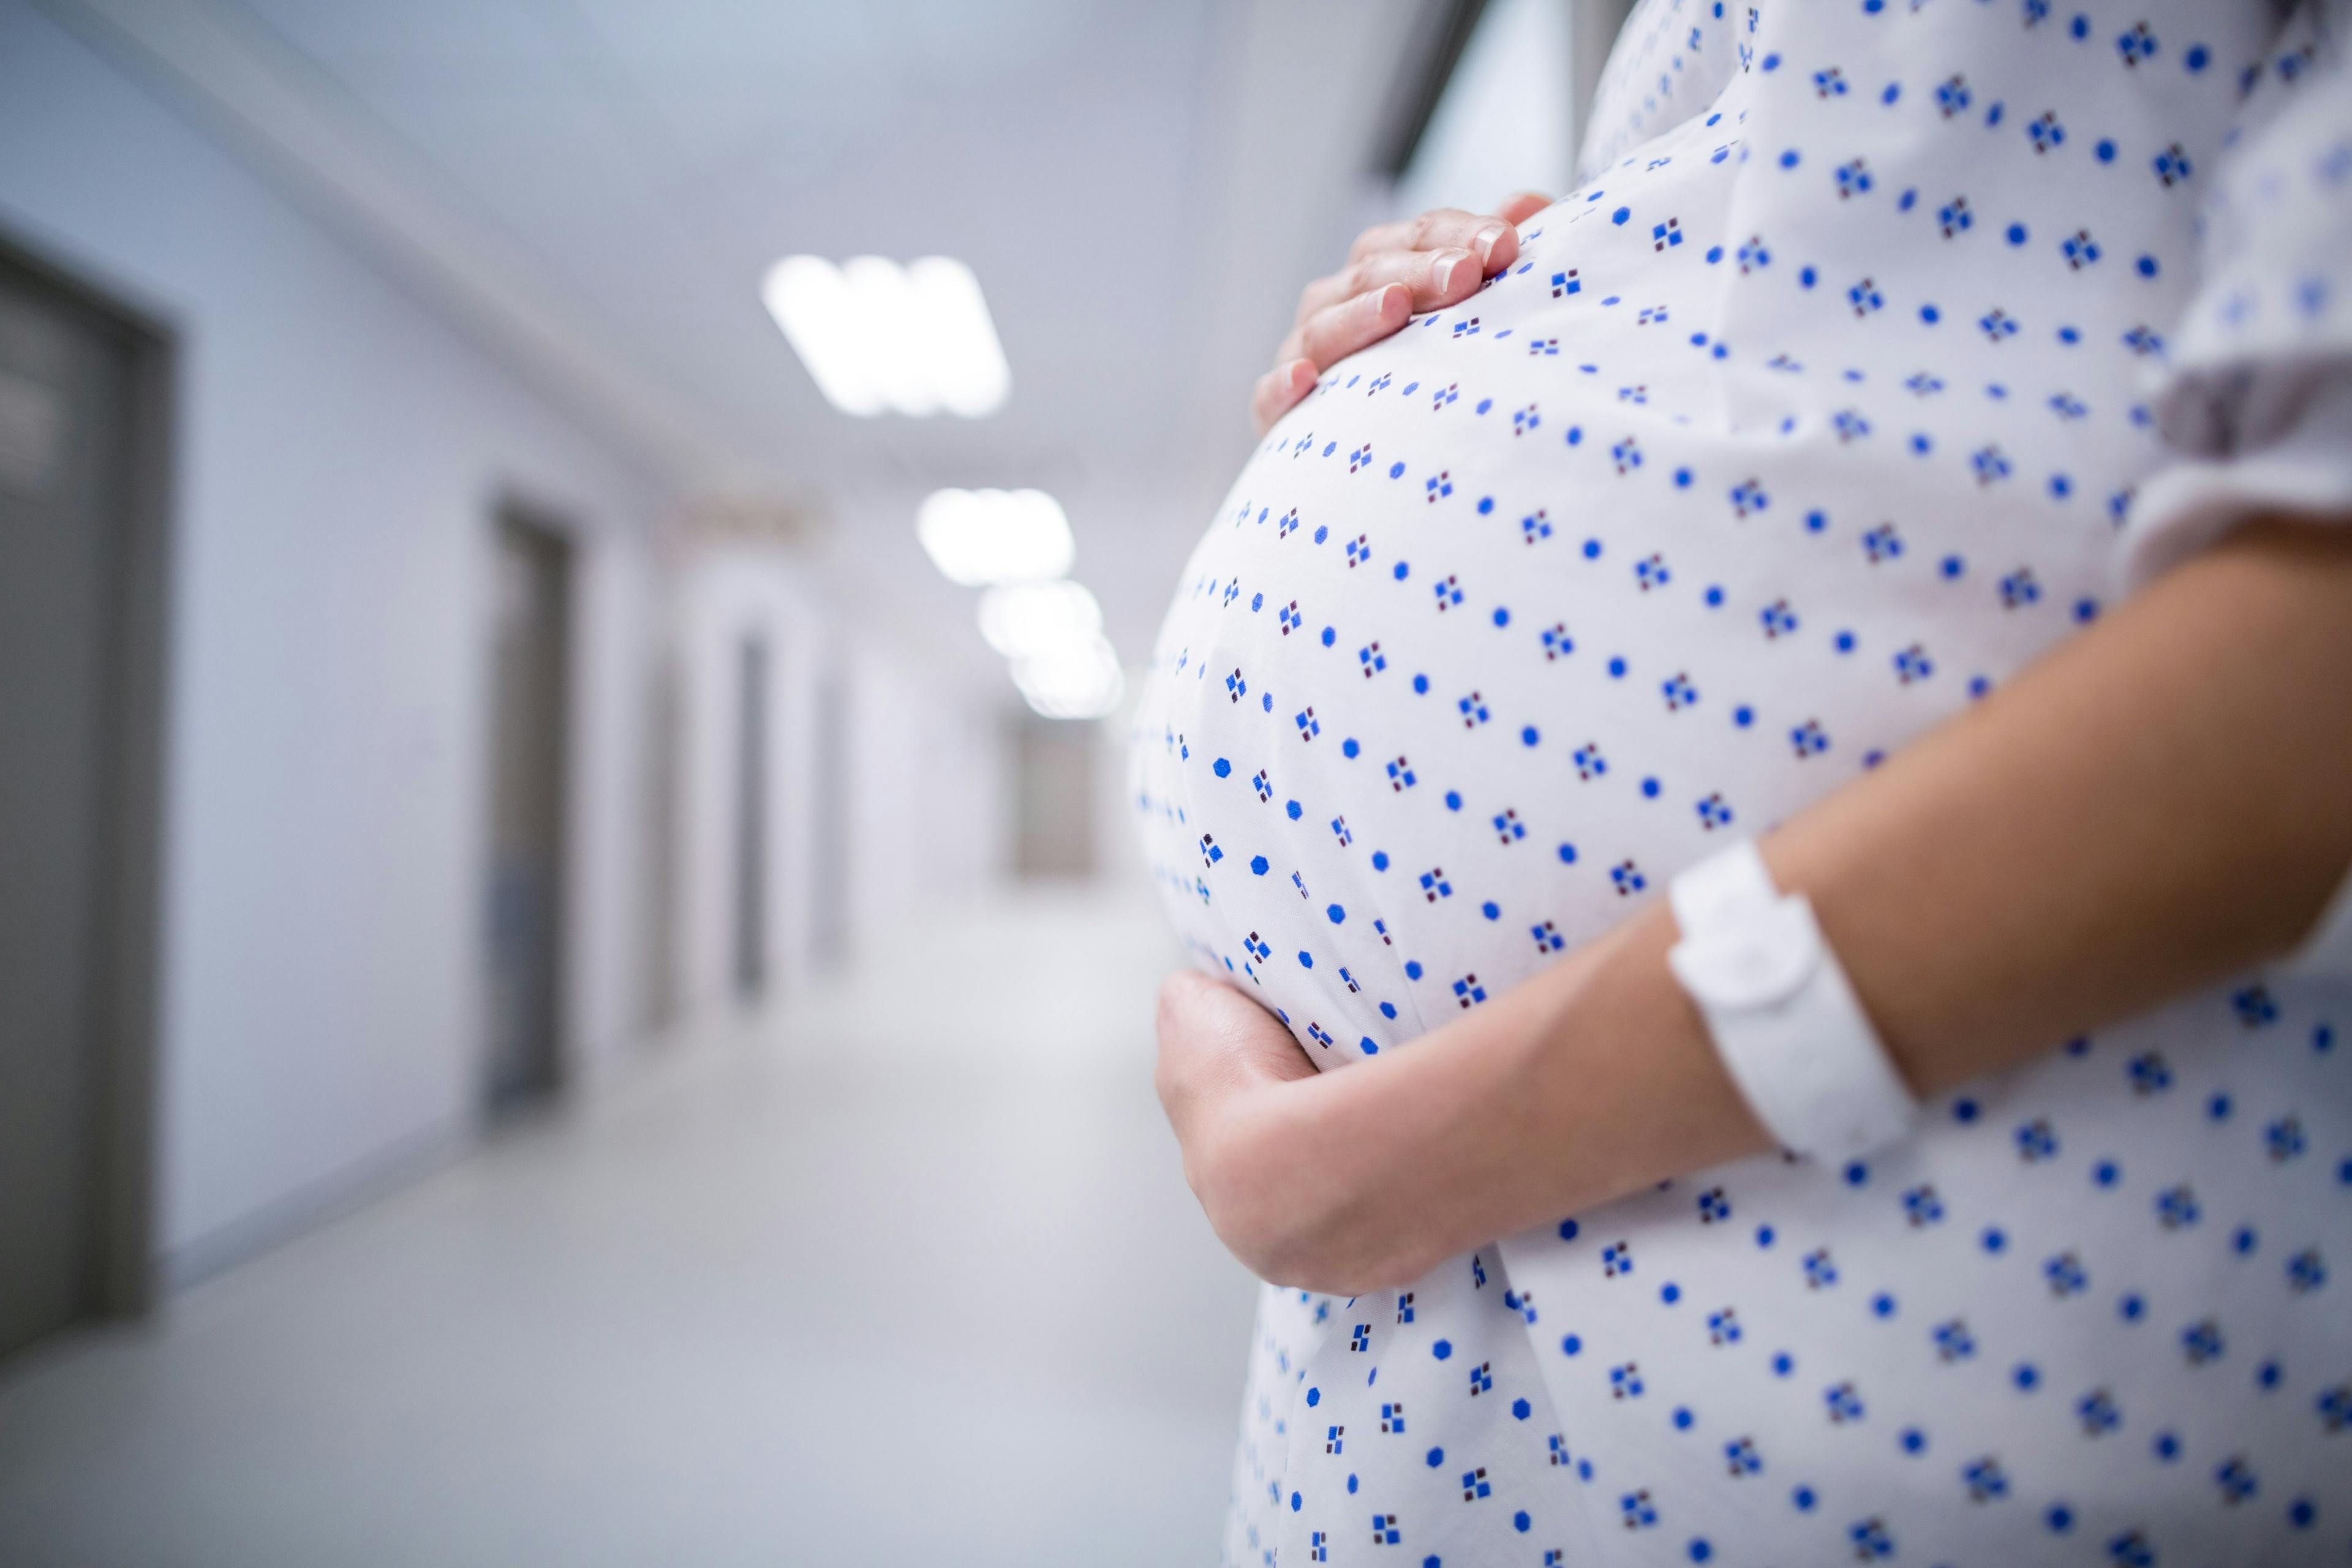 pregnant woman in a hospital gown